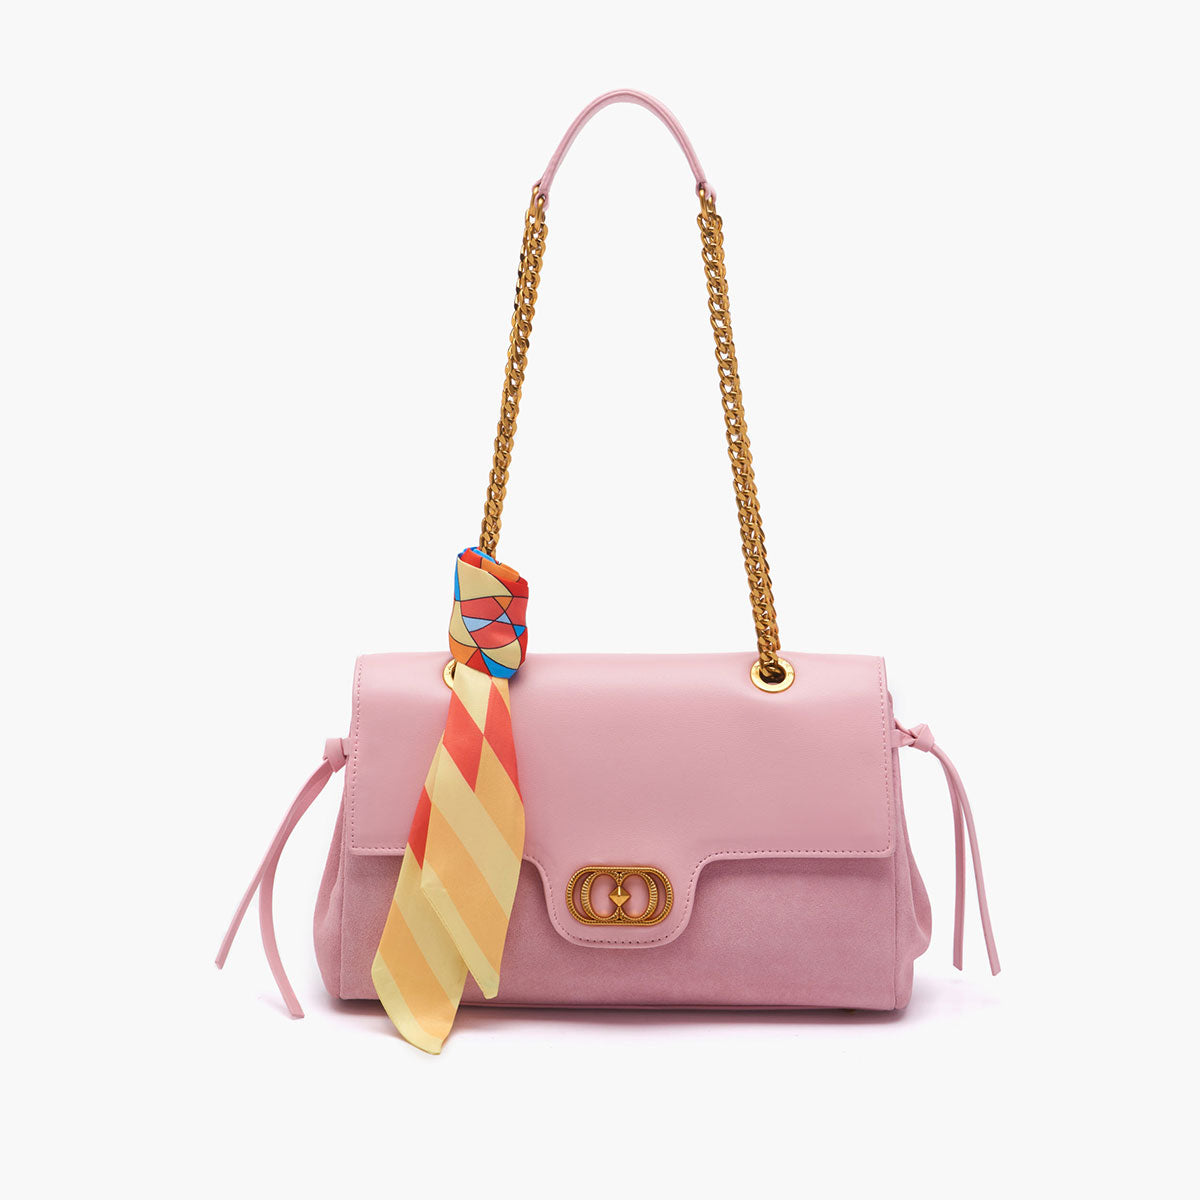 The Carrie Bag Transition Bag